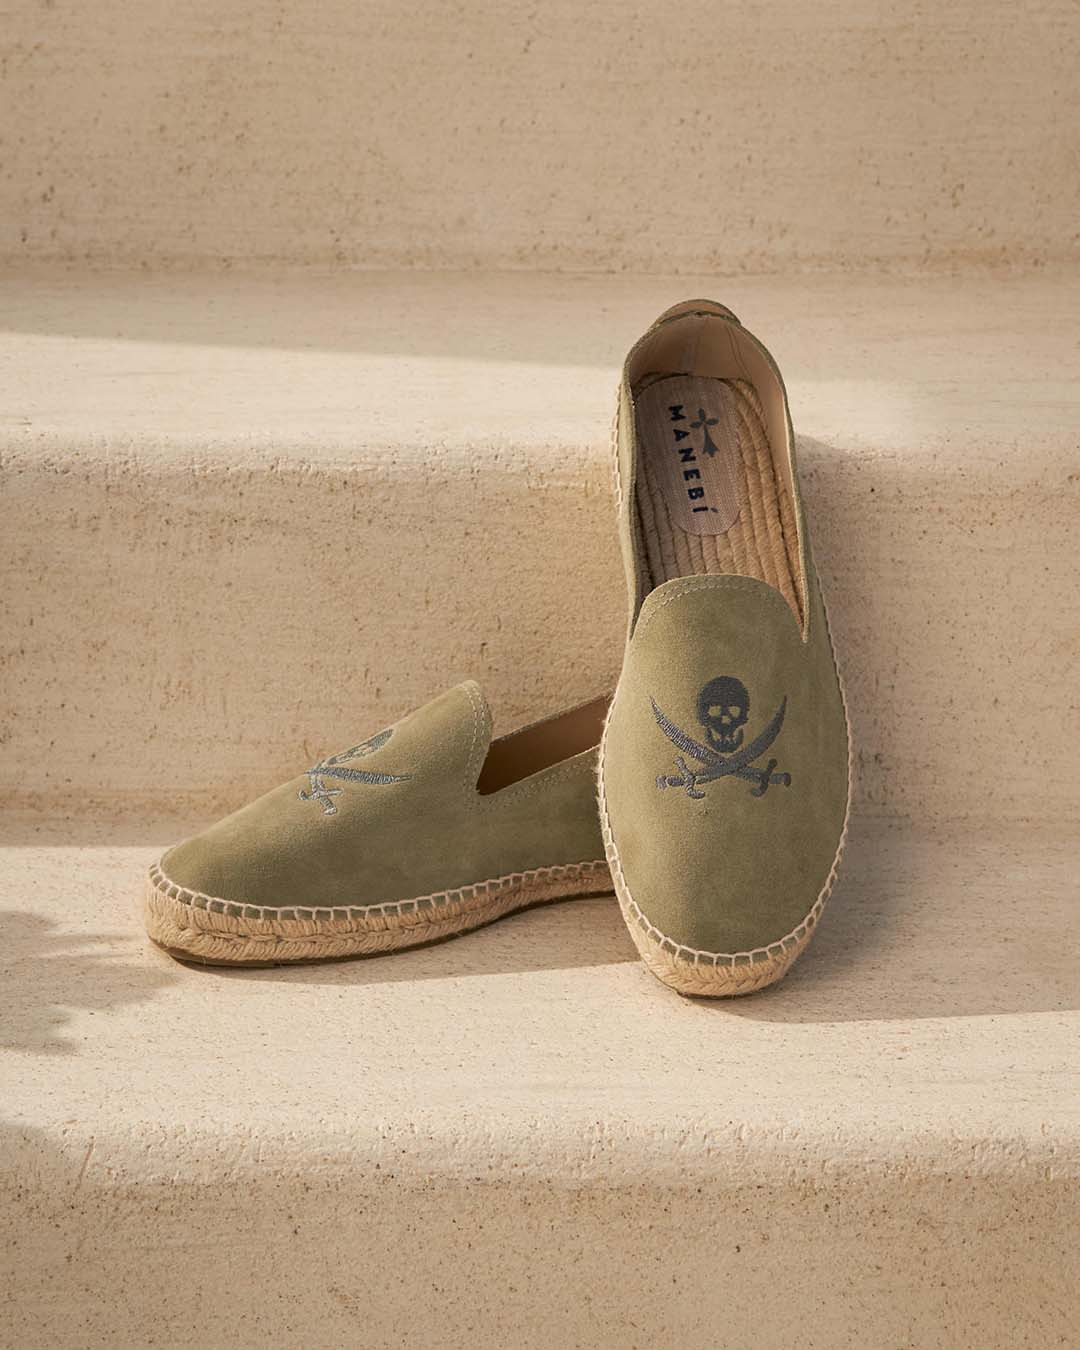 Espadrilles - Palm Springs - Military Green & Carbon Skull